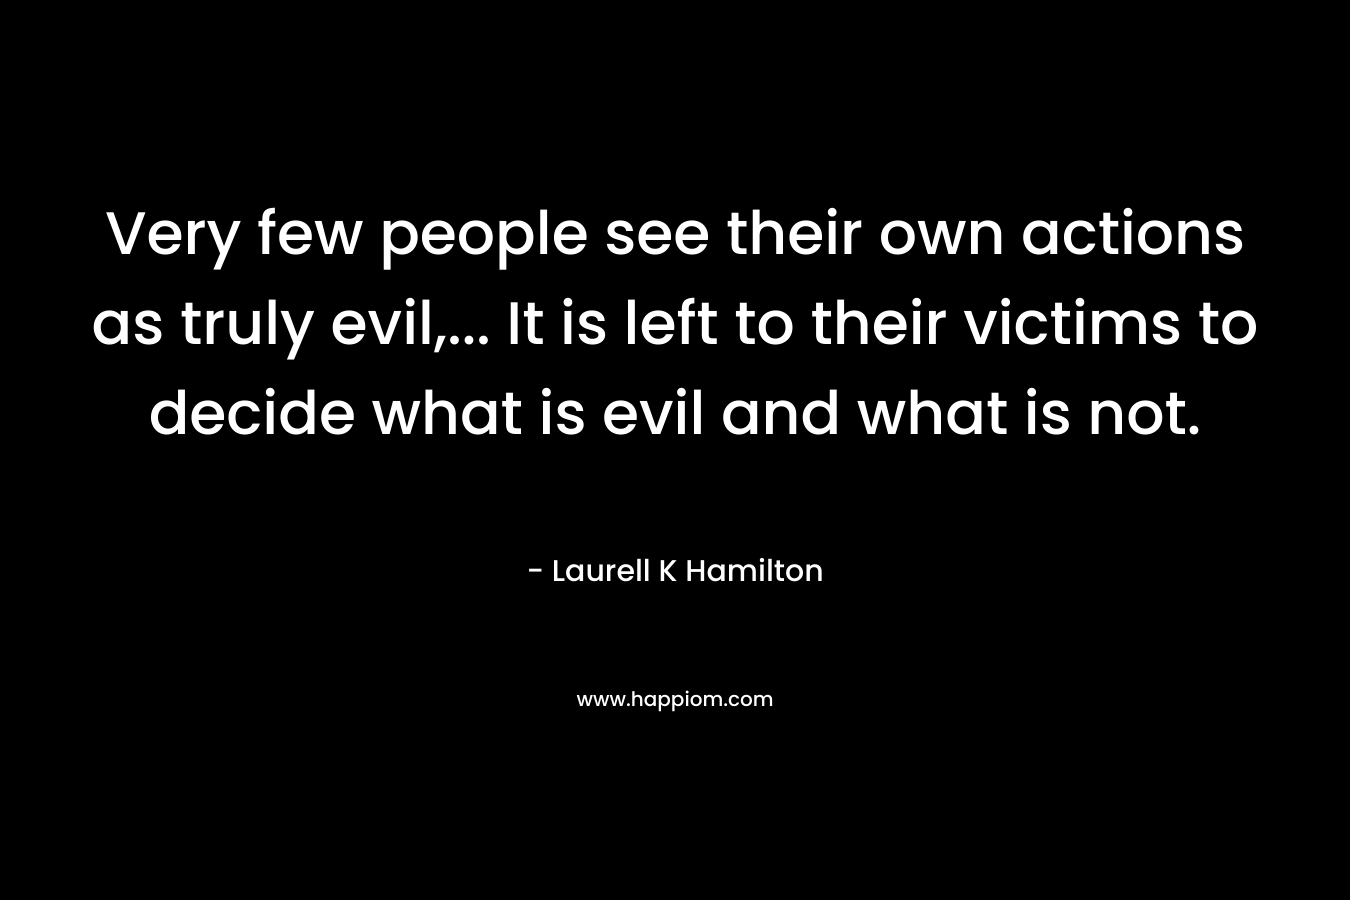 Very few people see their own actions as truly evil,... It is left to their victims to decide what is evil and what is not.